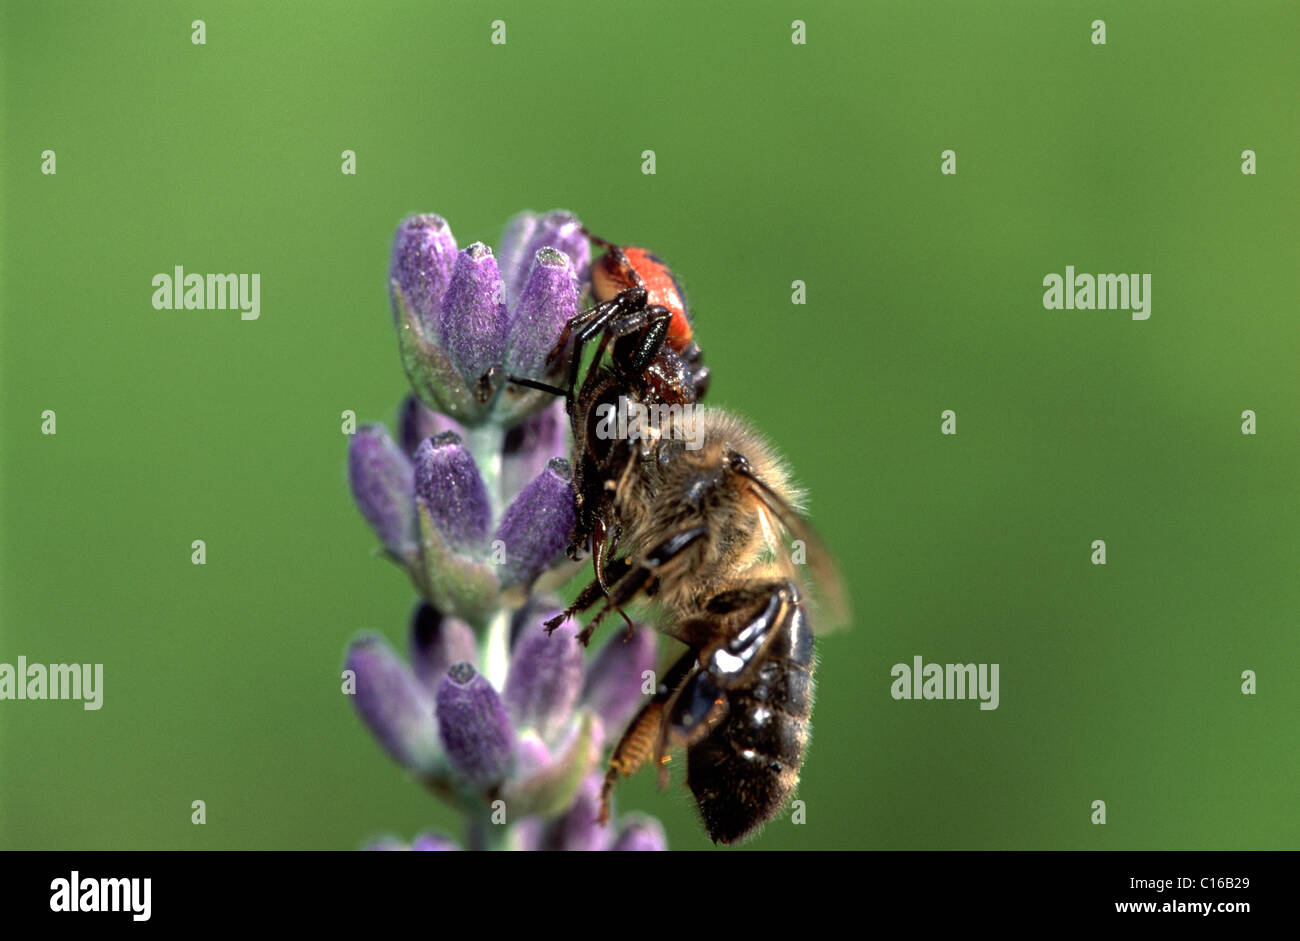 Crab Spider (Synaema globosum) perched on a Lavender blossom (Lavandula) with its prey, a Honey Bee (Apis mellifica), Cannes Stock Photo